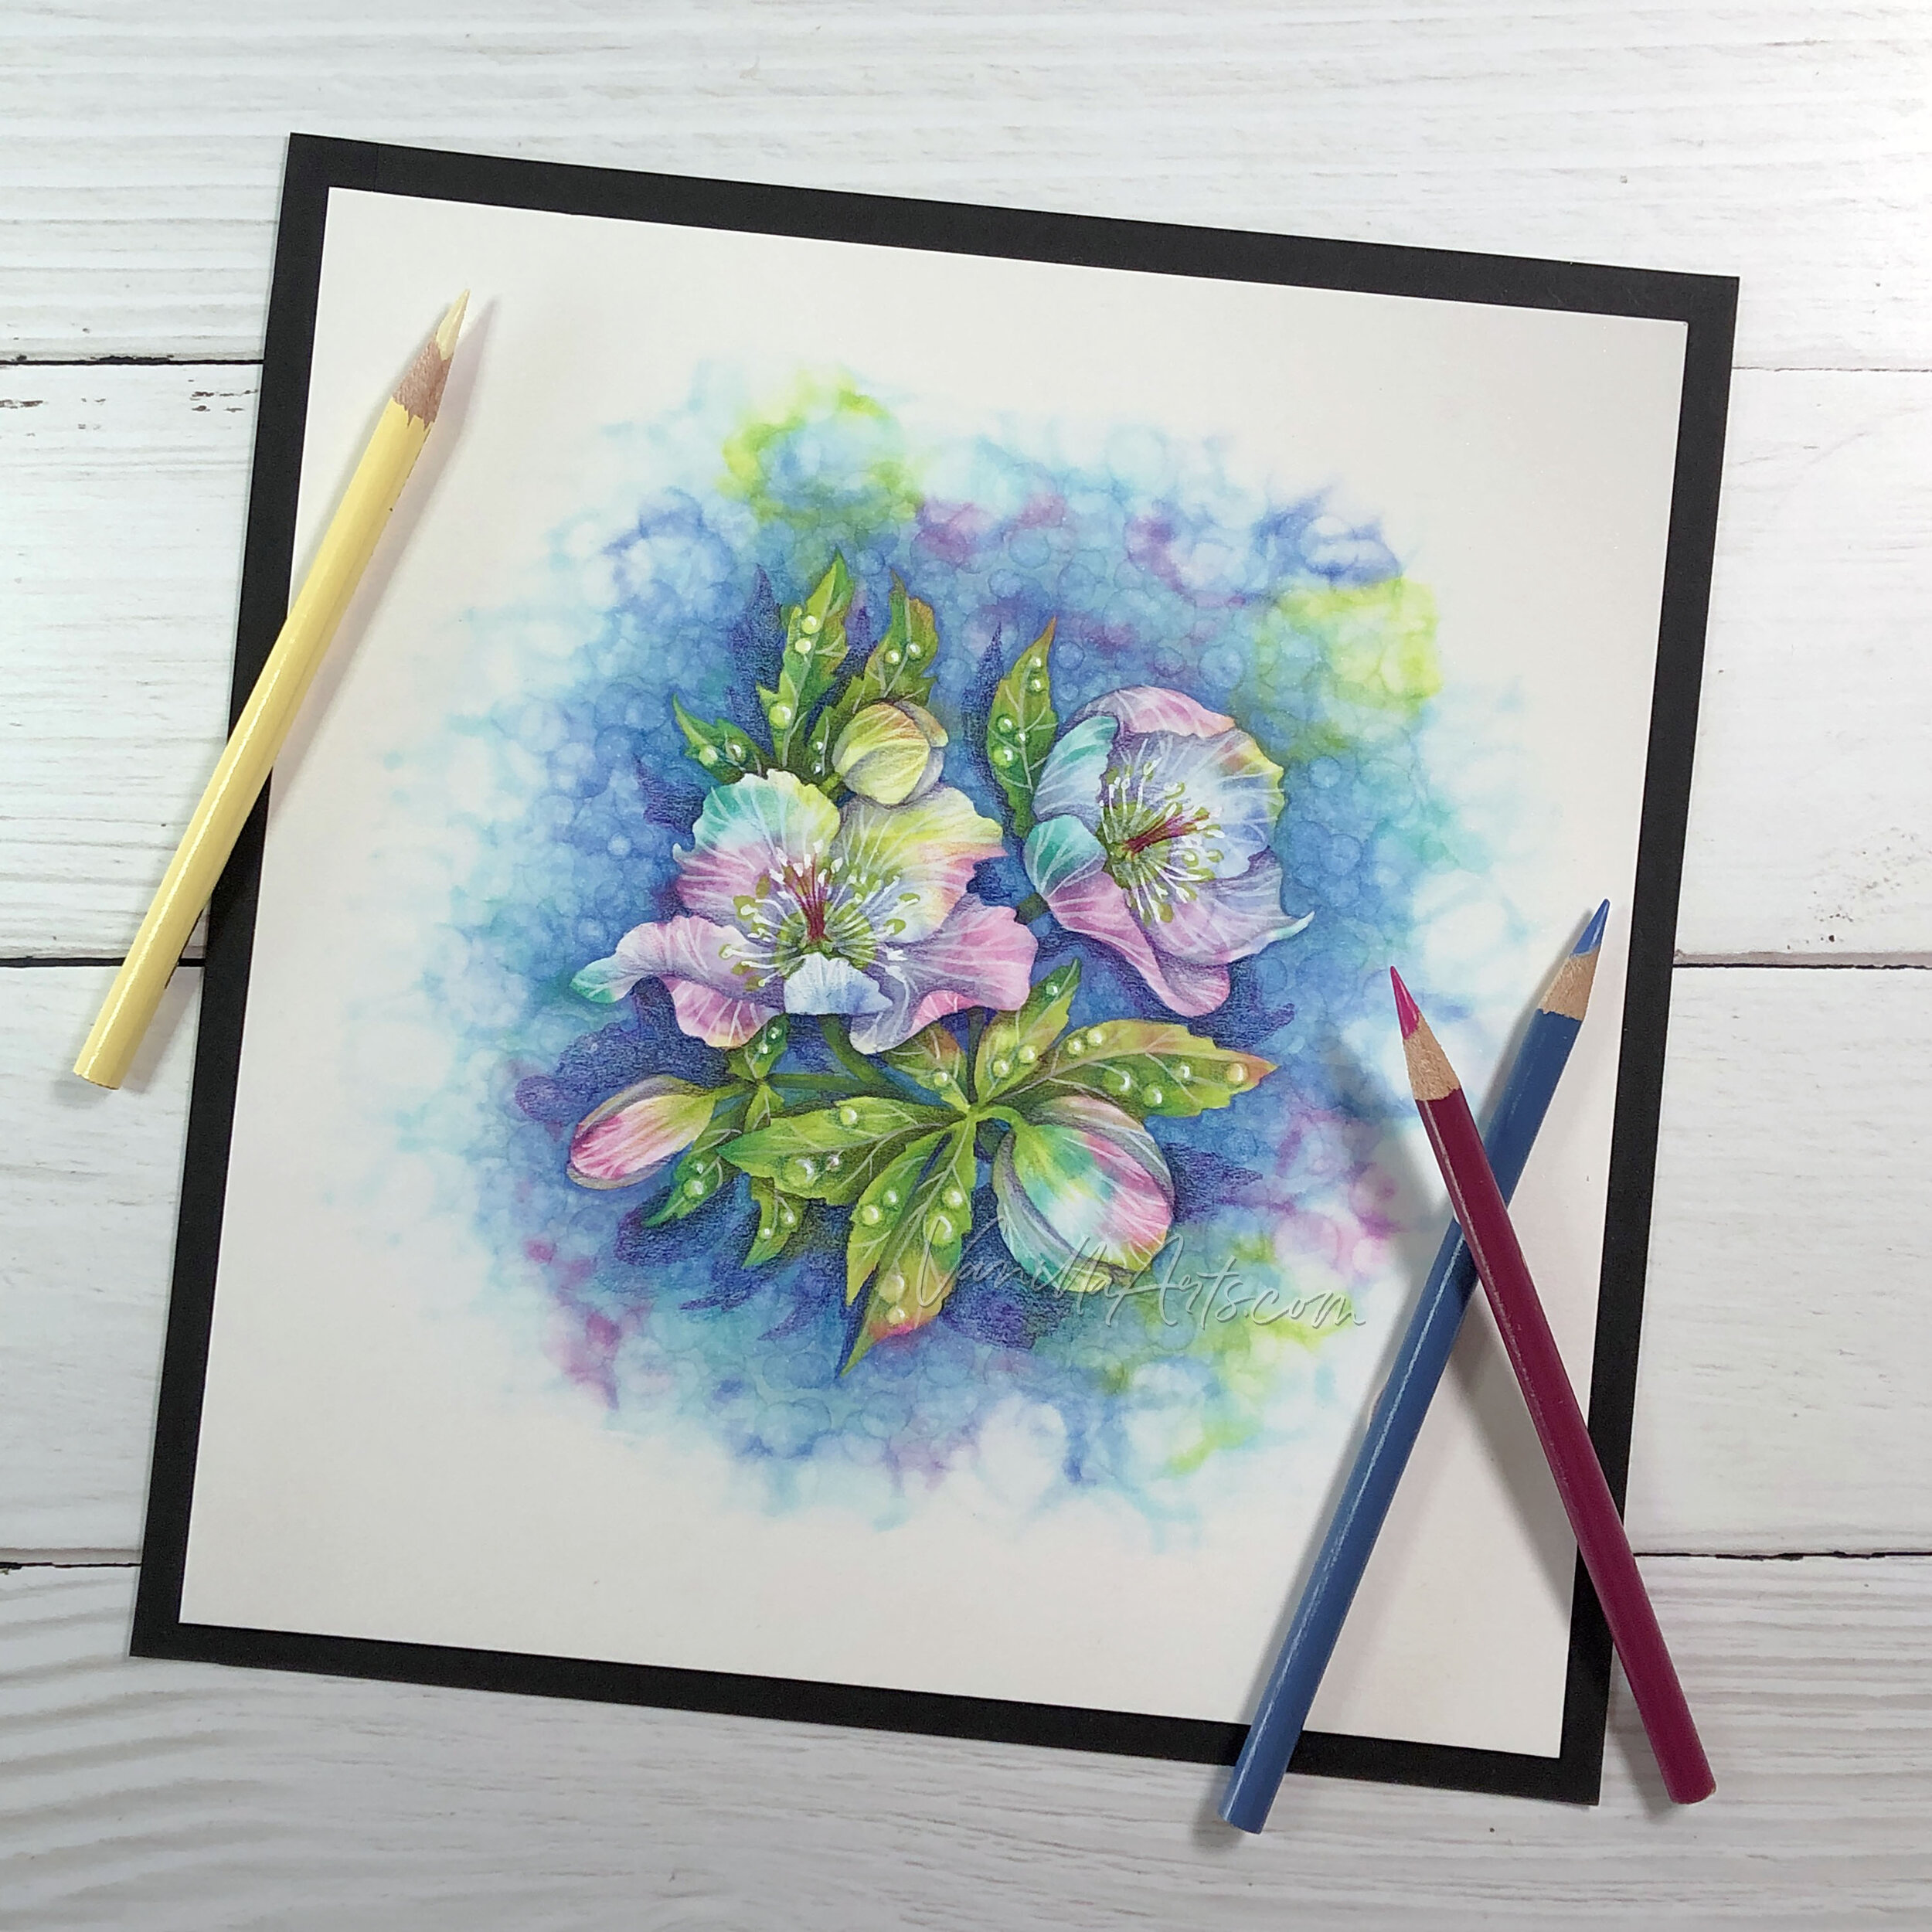 Four Colored Pencil Techniques to Elevate Your Art – Ink+Volt